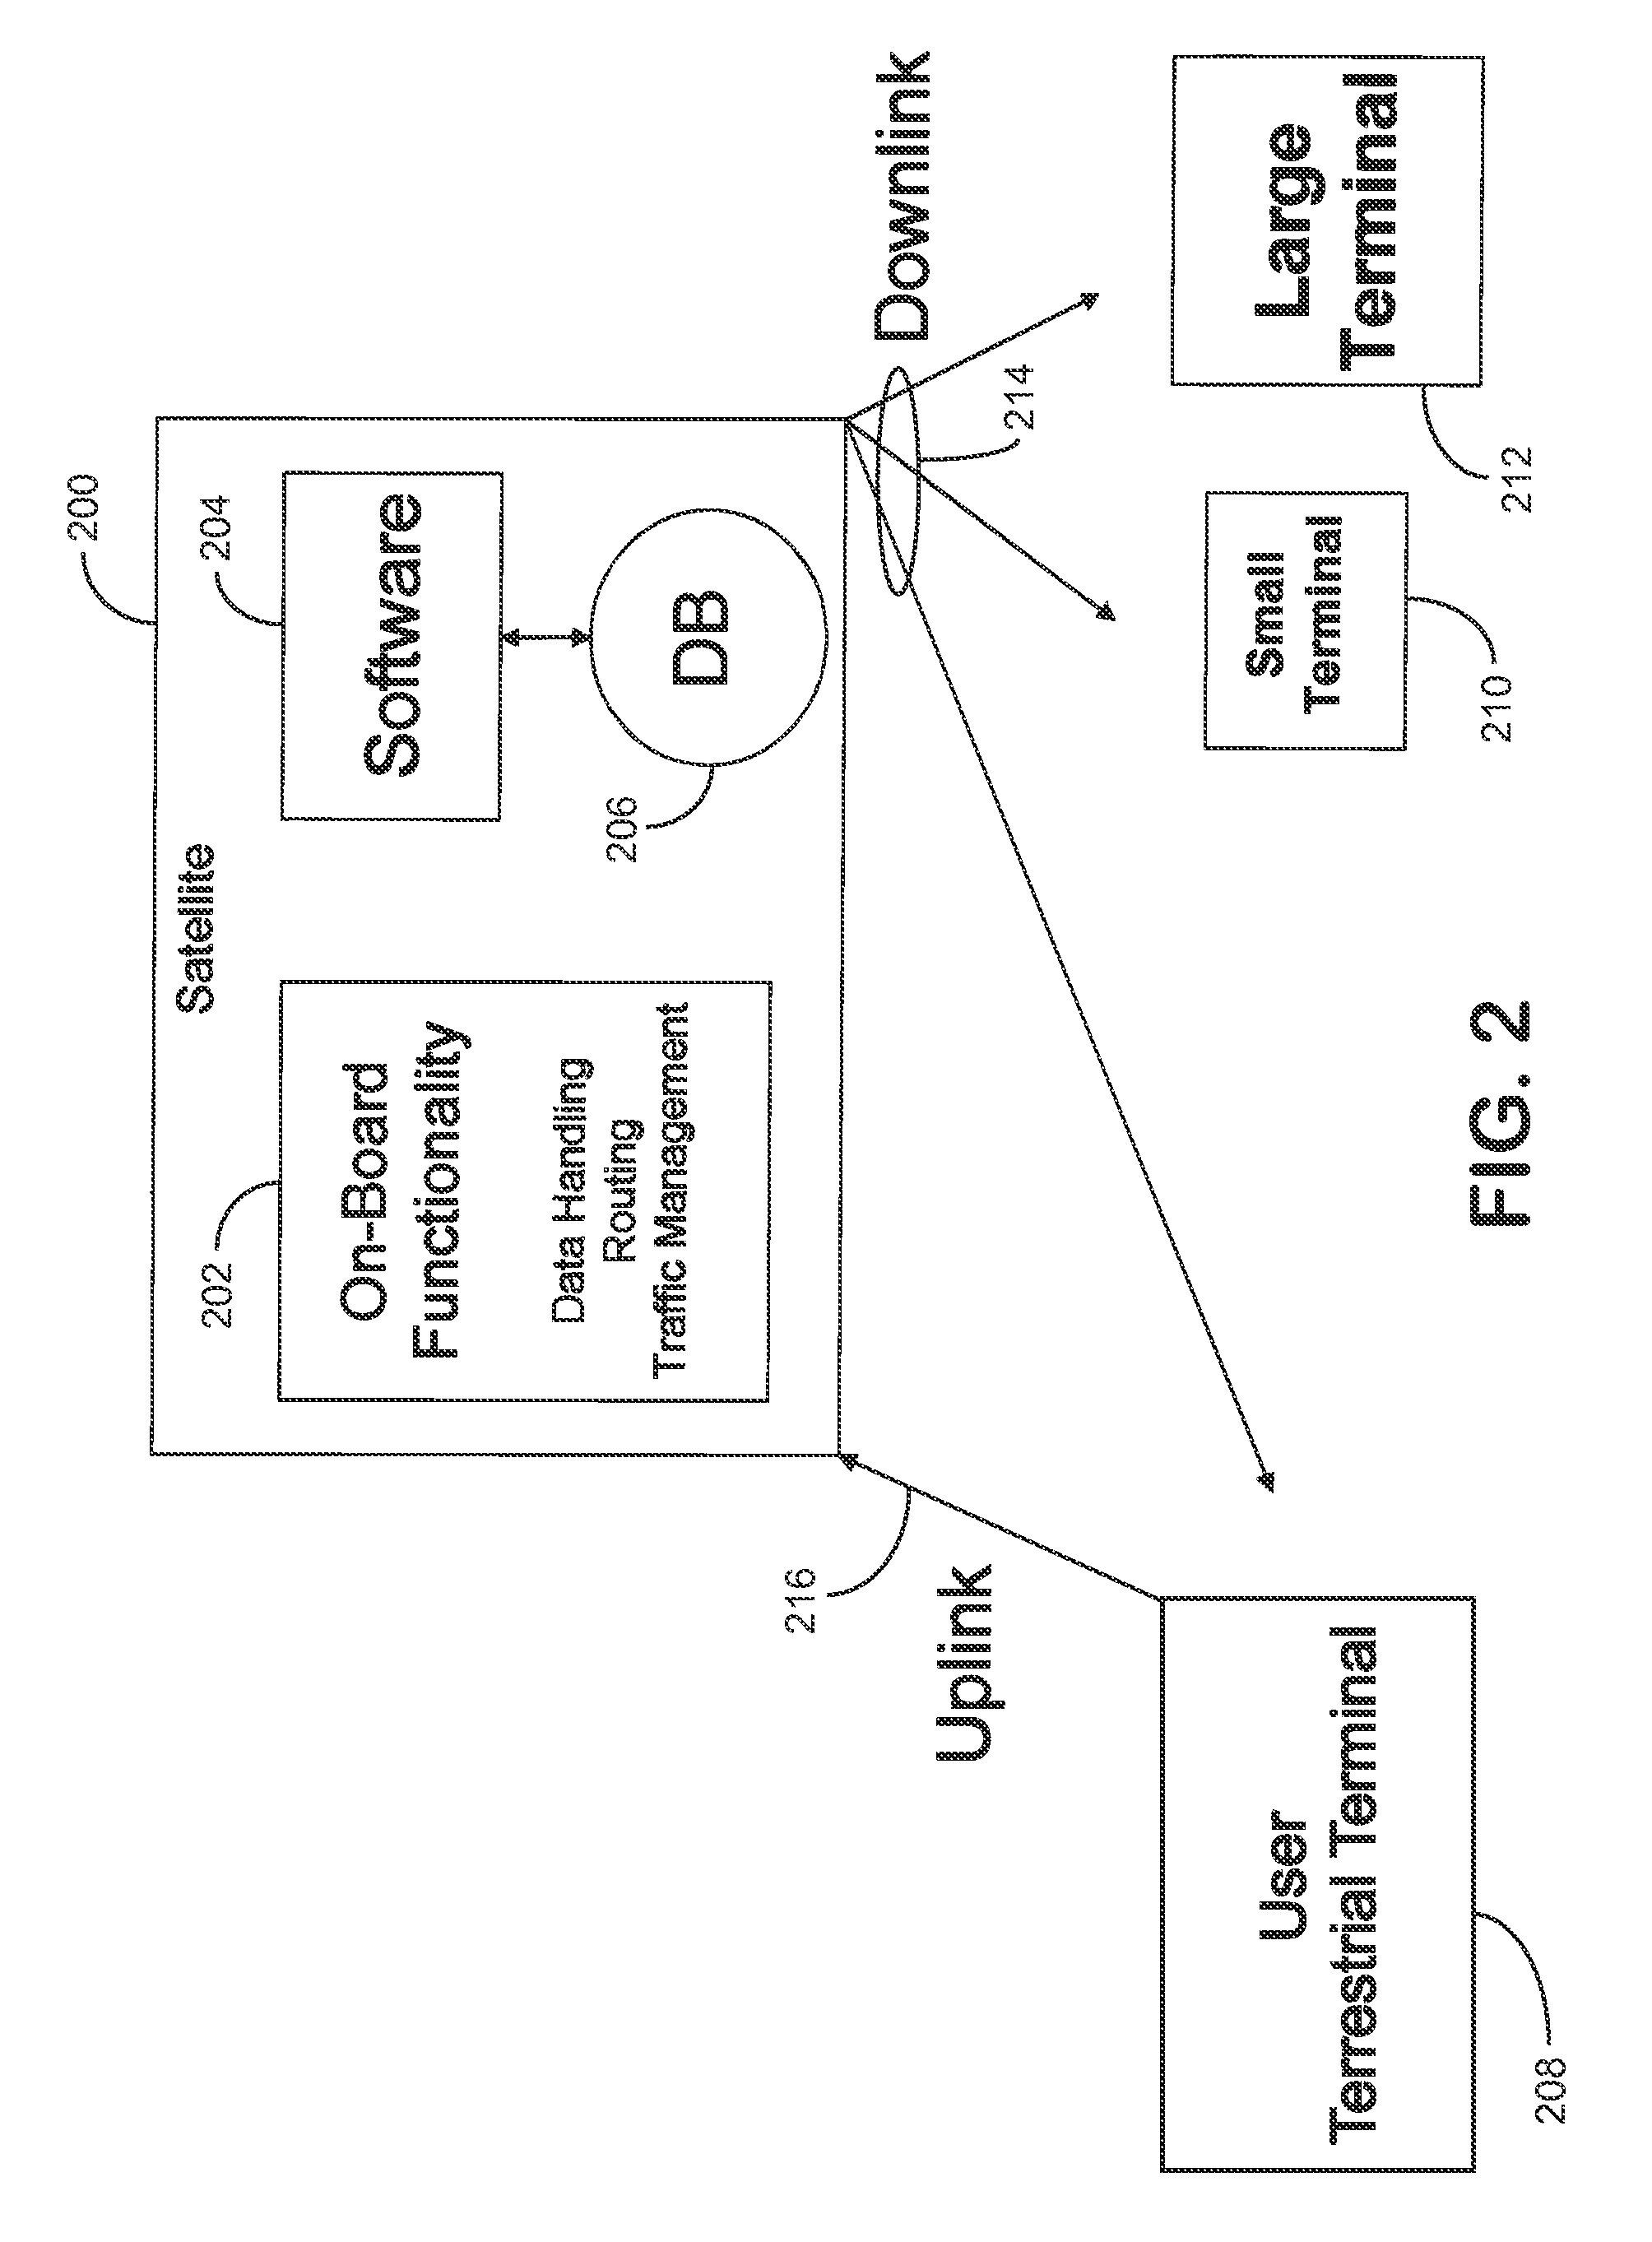 Systems and methods for satellite communications with mobile terrestrial terminals